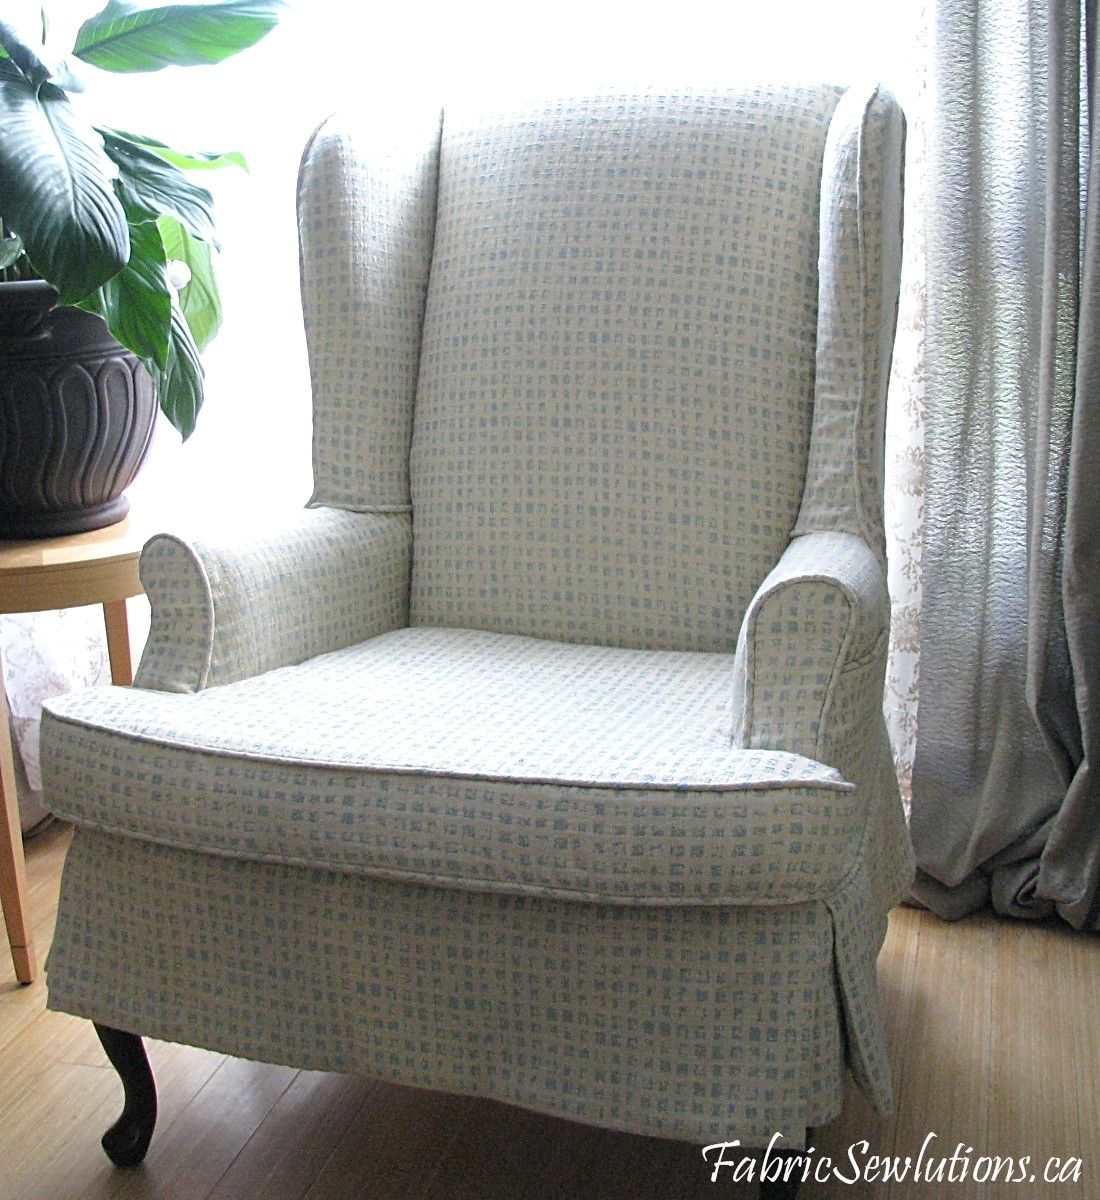 Sewlutions' World: Wingback Chair Slipcover